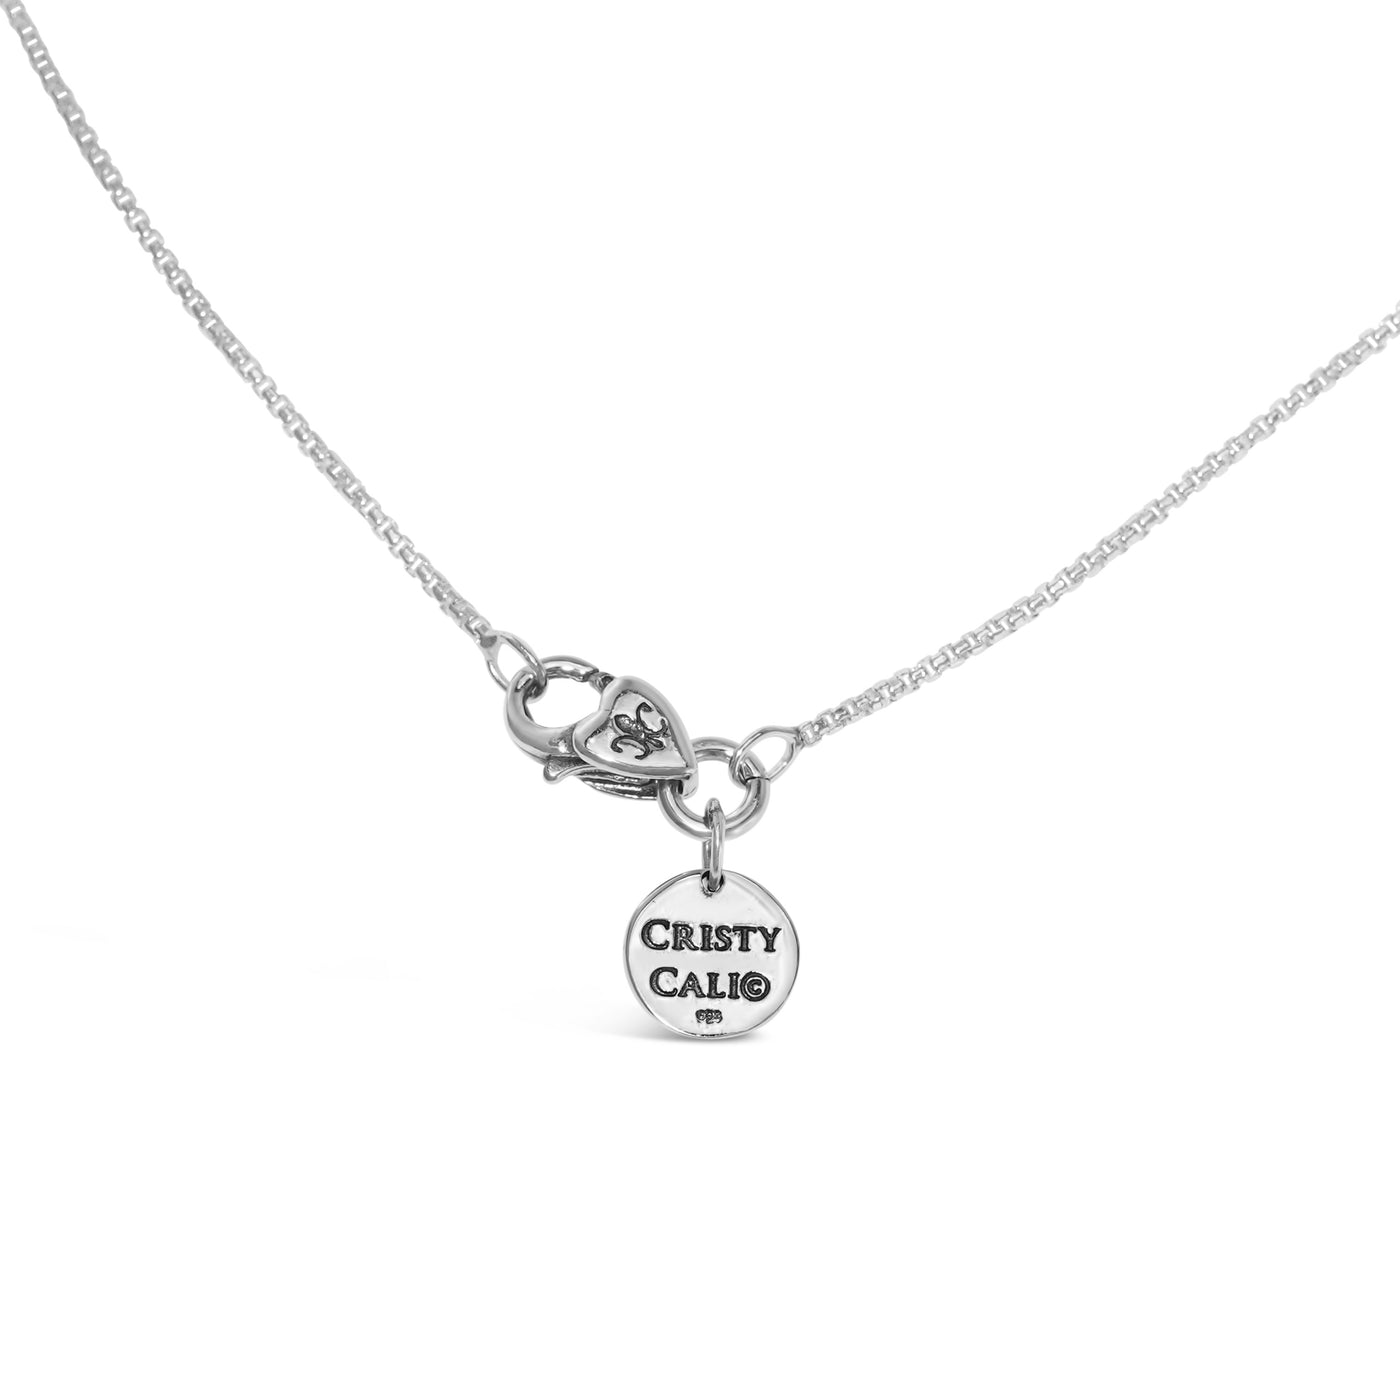 Cristy Cali Rounded Box Chain - 1.3 mm